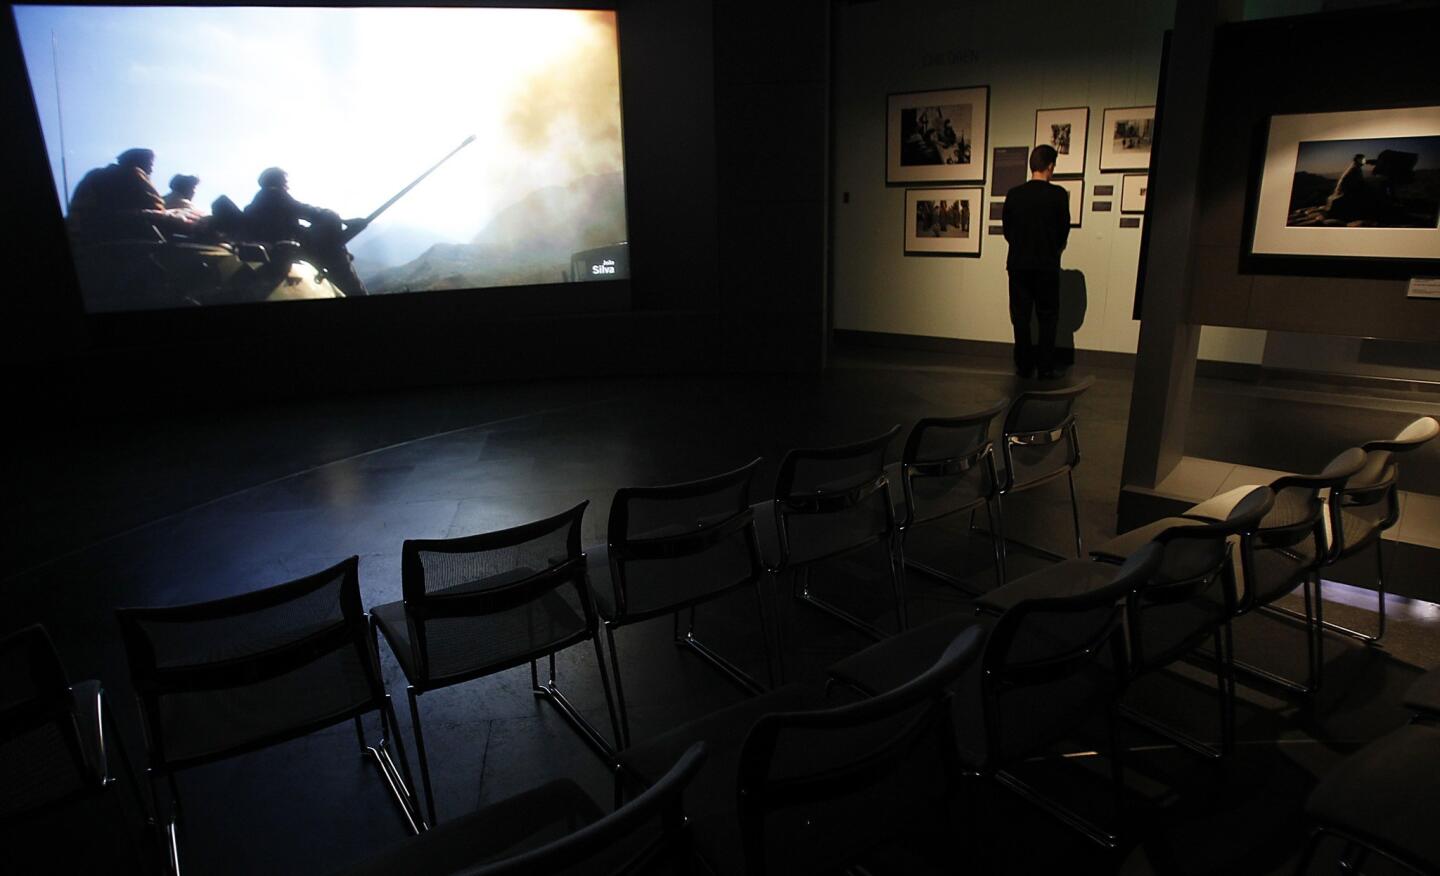 "War/Photography: Images of Armed Conflict and Its Aftermath" opens to the public on Saturday, March 23, 2013, at the Annenberg Space for Photography.